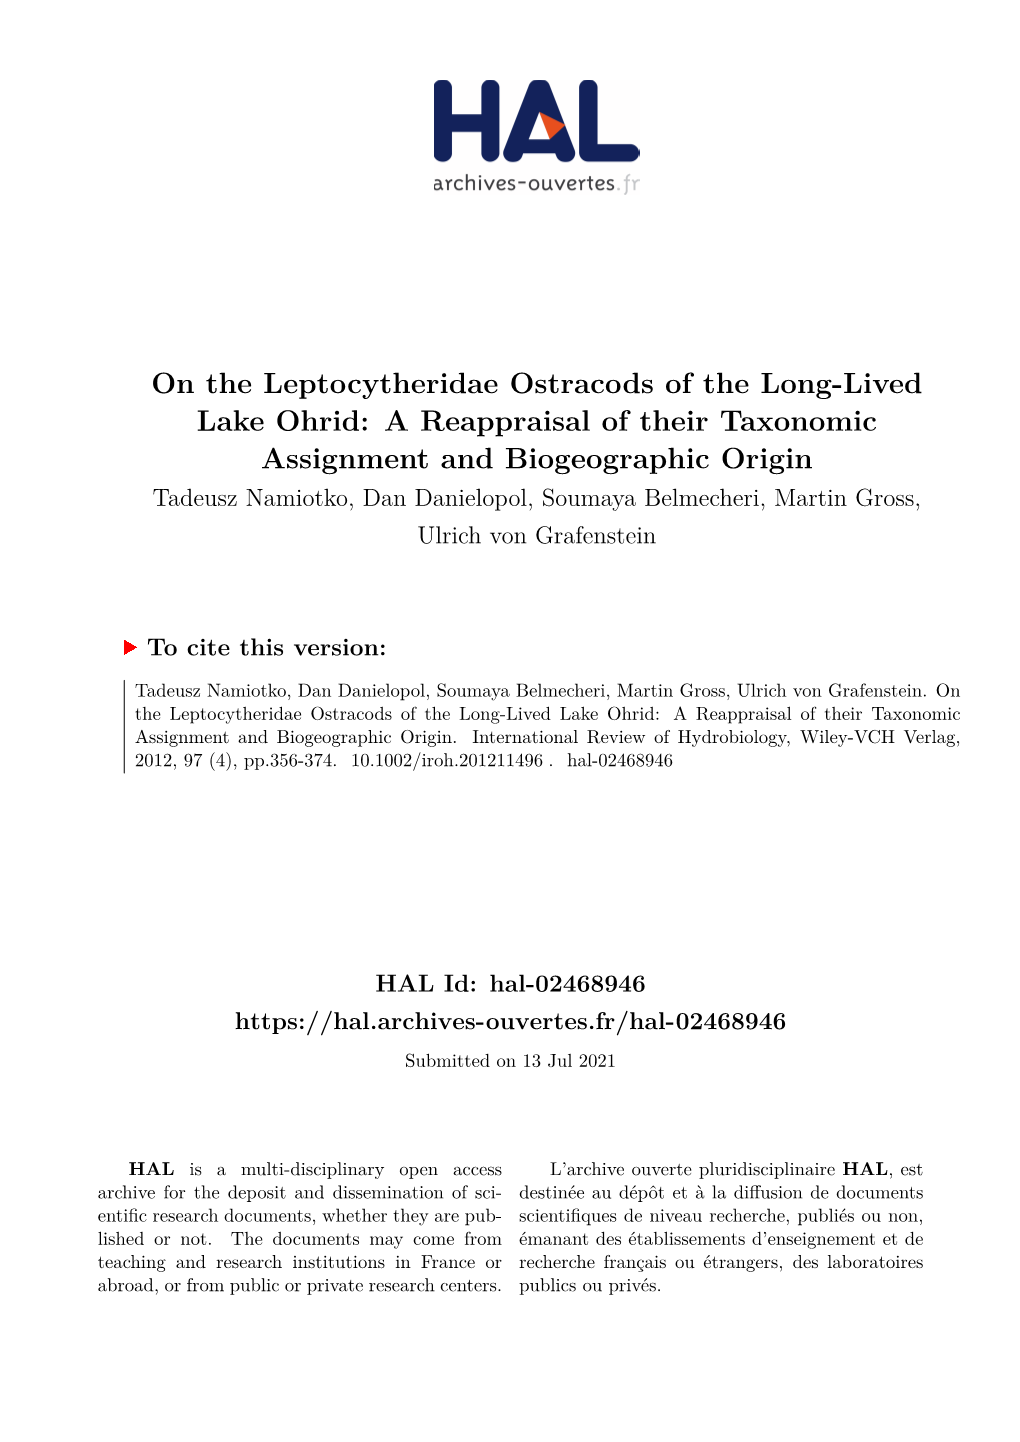 On the Leptocytheridae Ostracods of the Long-Lived Lake Ohrid